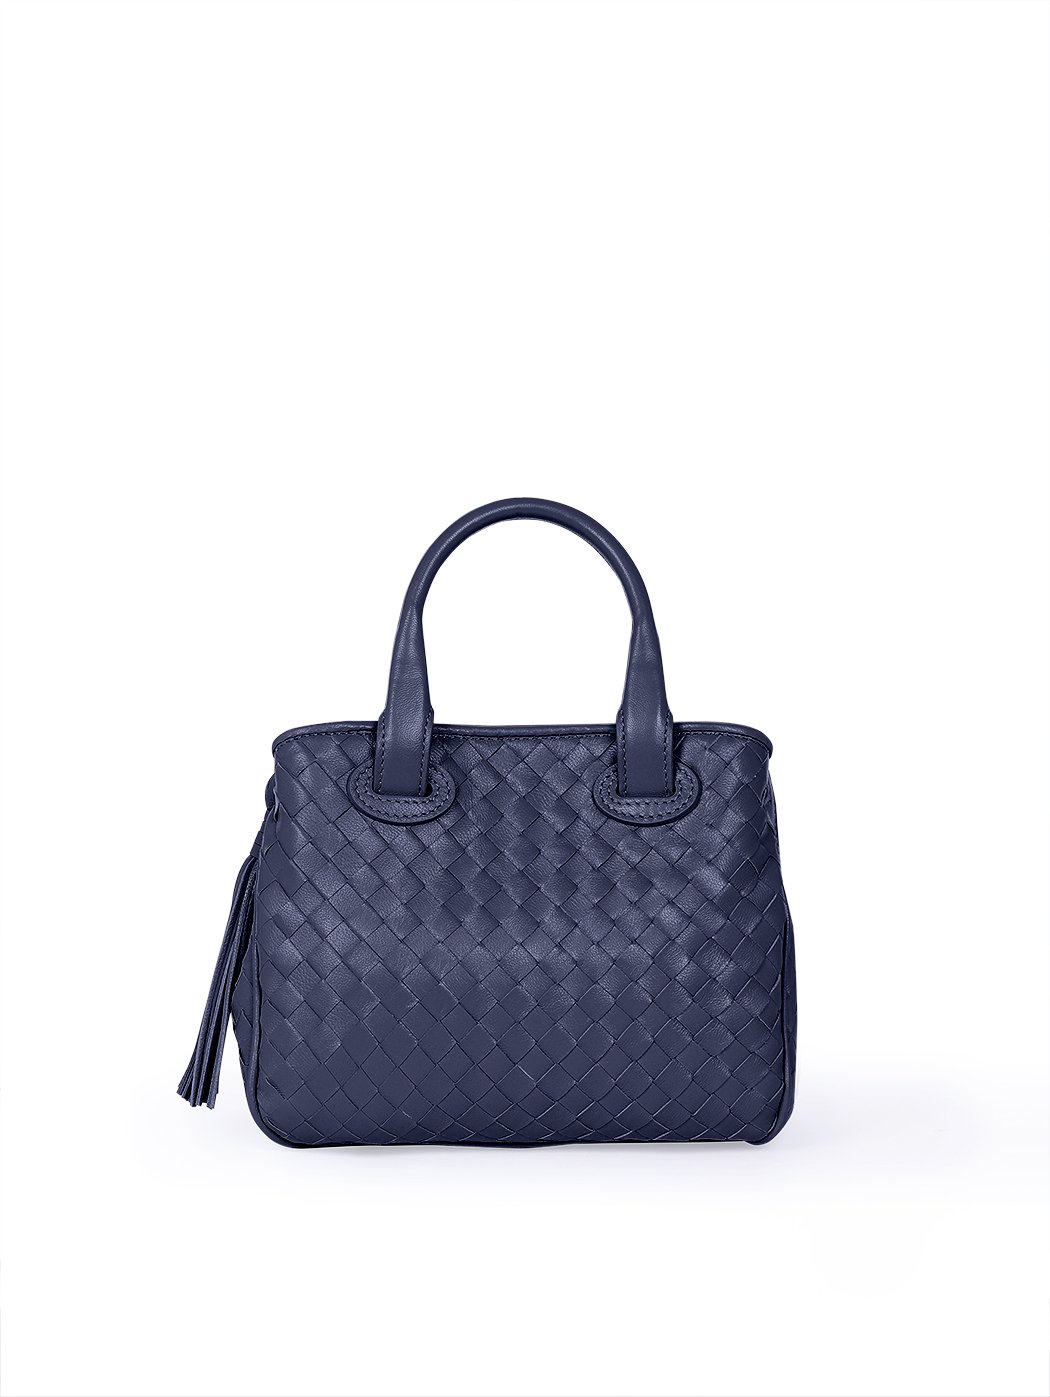 Top Handle Crossbody Woven Leather Purse Navy Blue